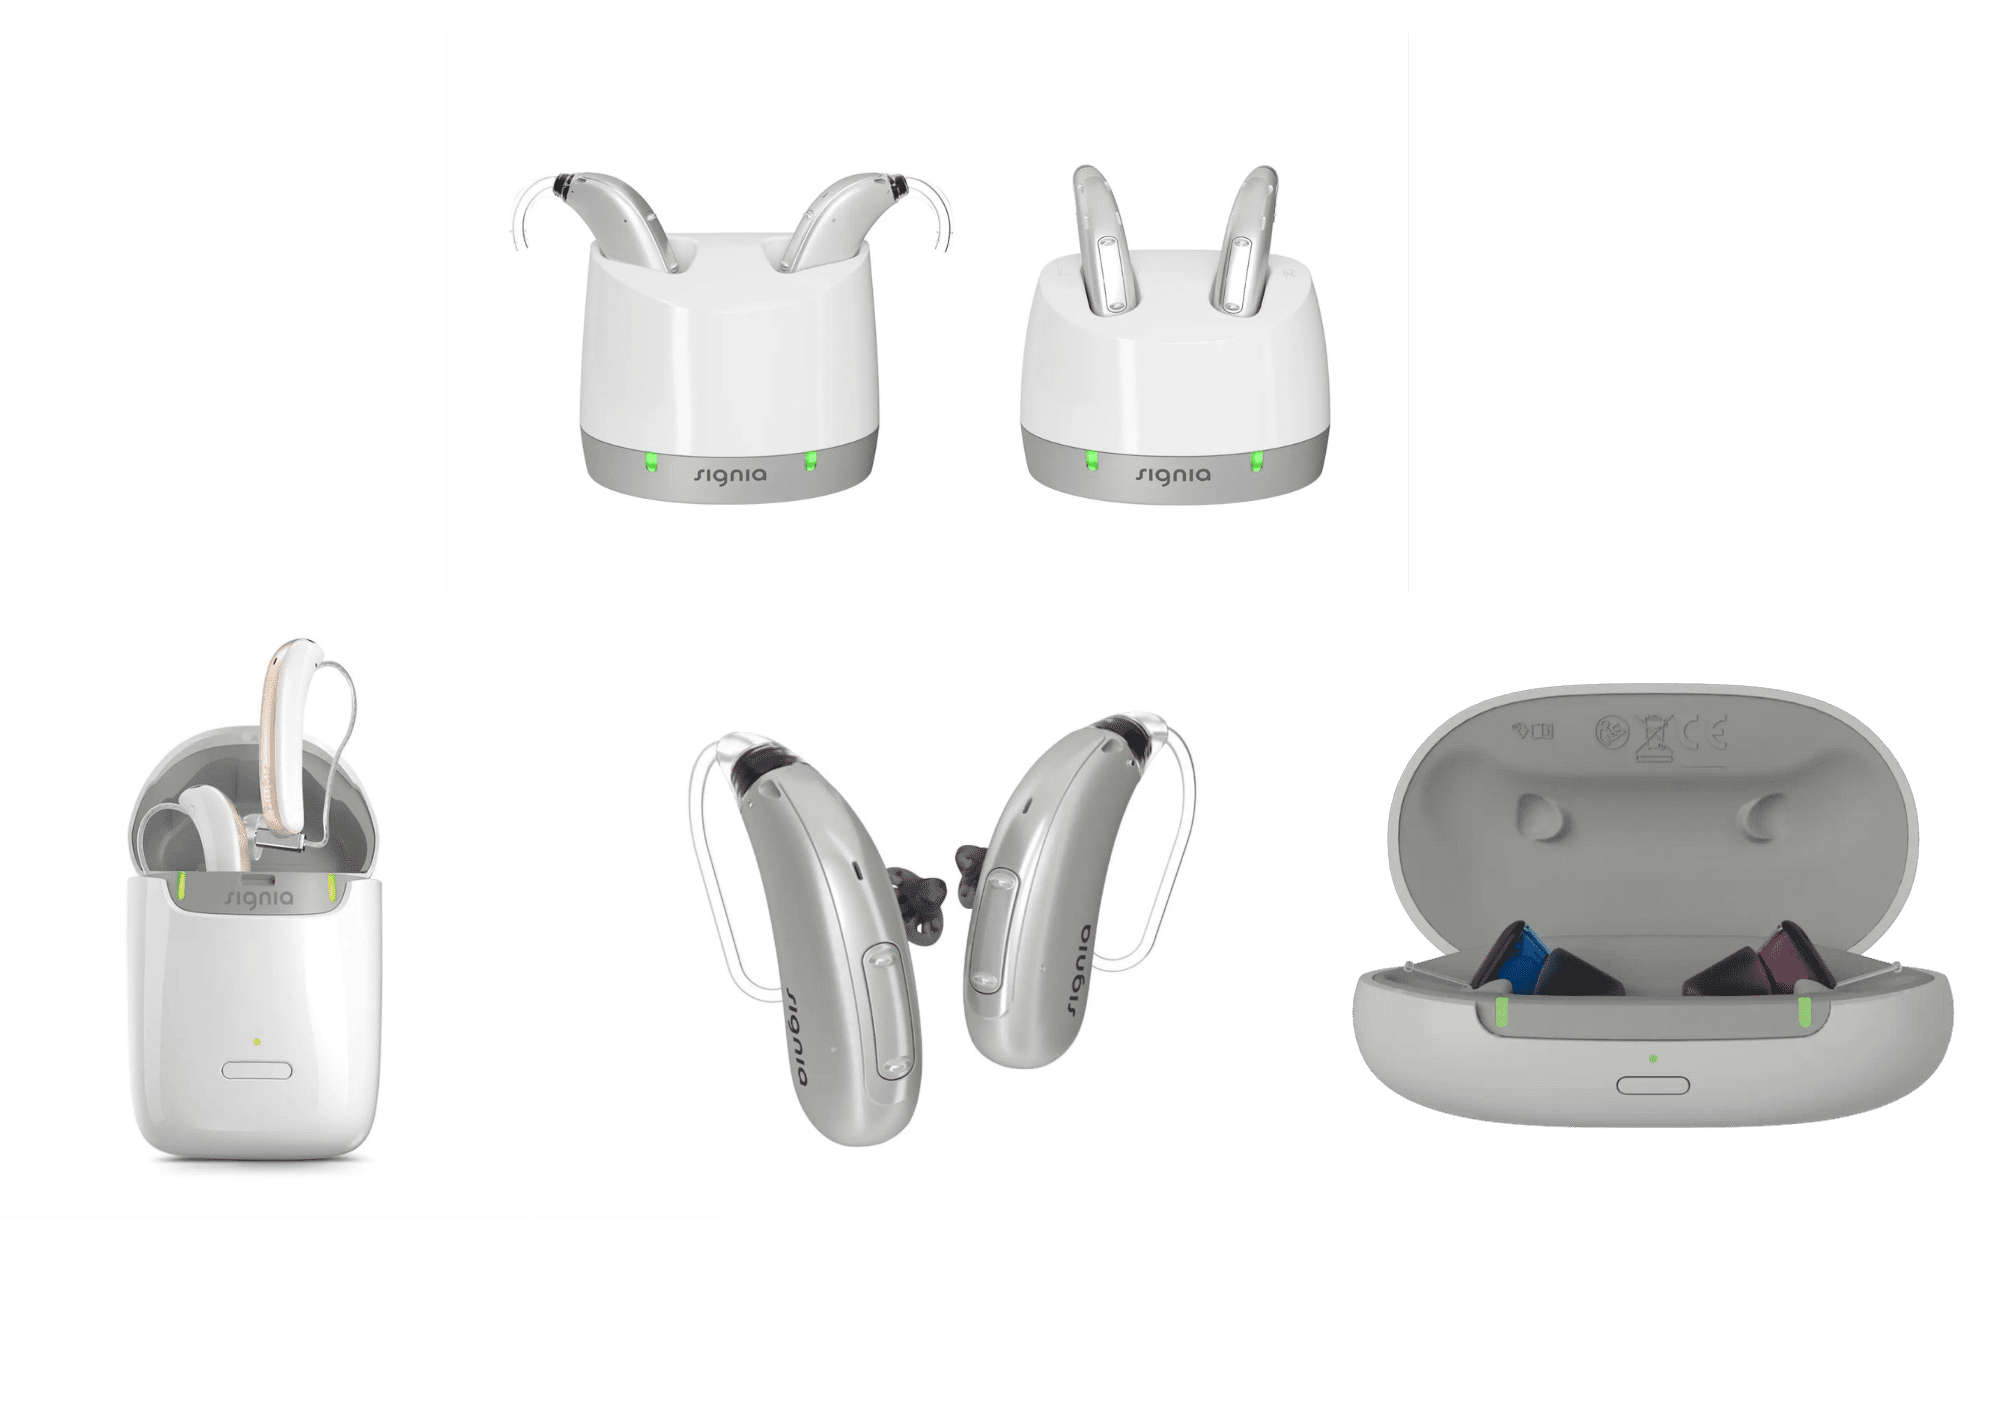 Picture of Signia rechargeable hearing aids and chargers